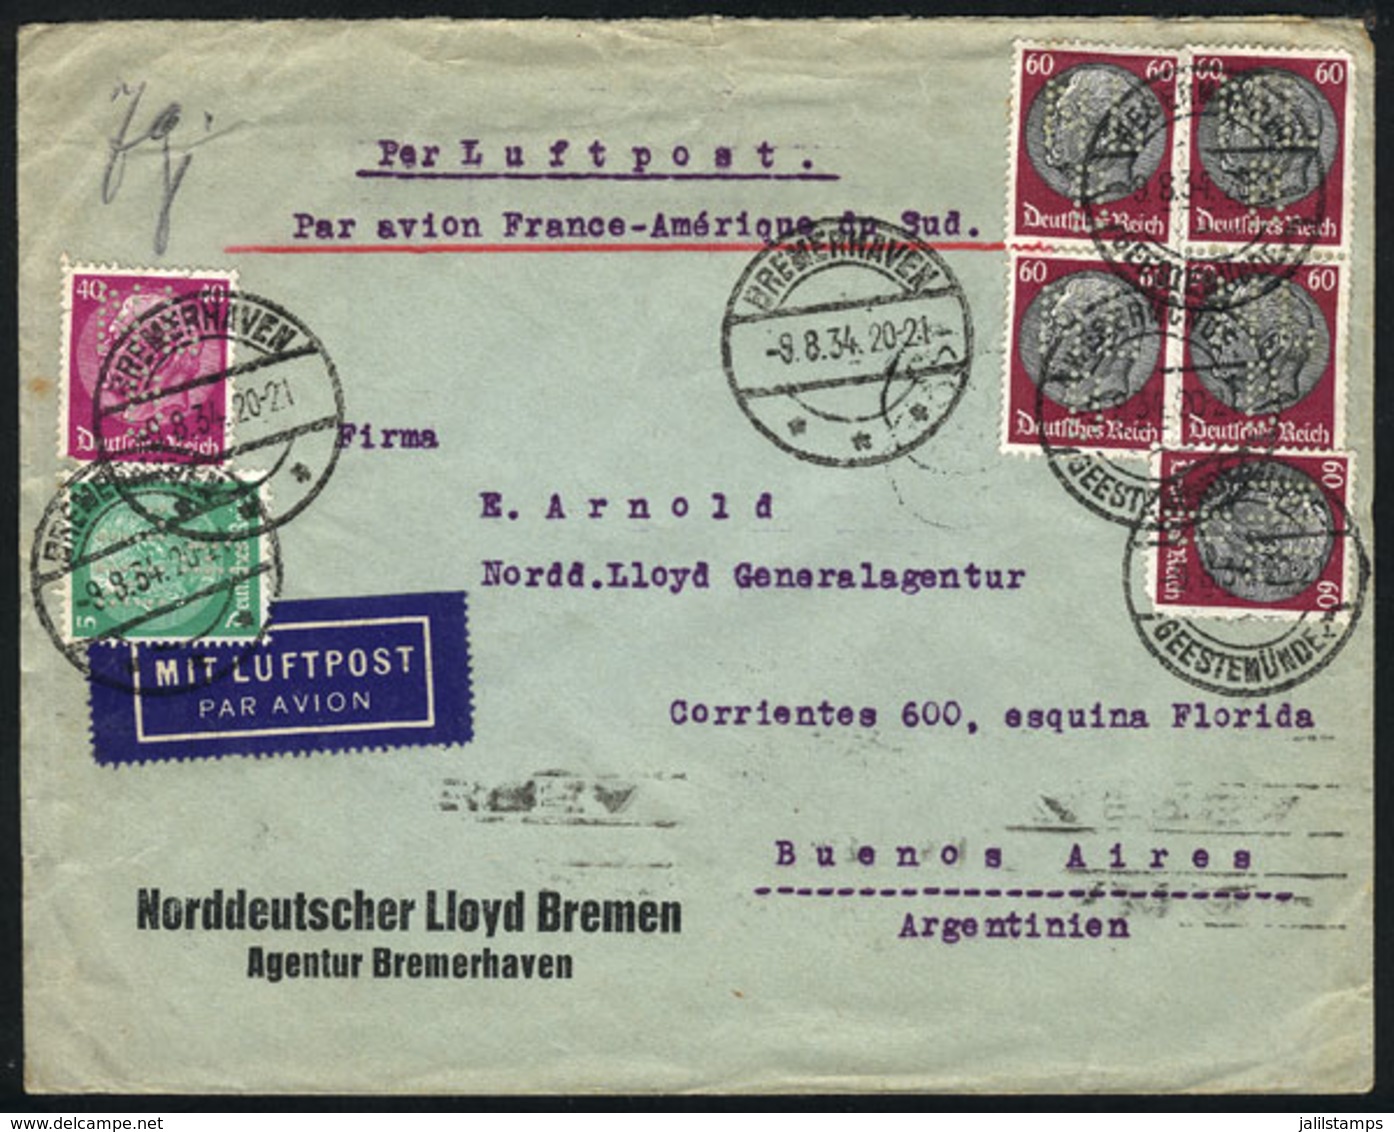 GERMANY: Airmail Cover Sent By Air France From Bremerhaven To Argentina On 9/AU/1934 Franked With 3.45Mk., All The Stamp - Prephilately